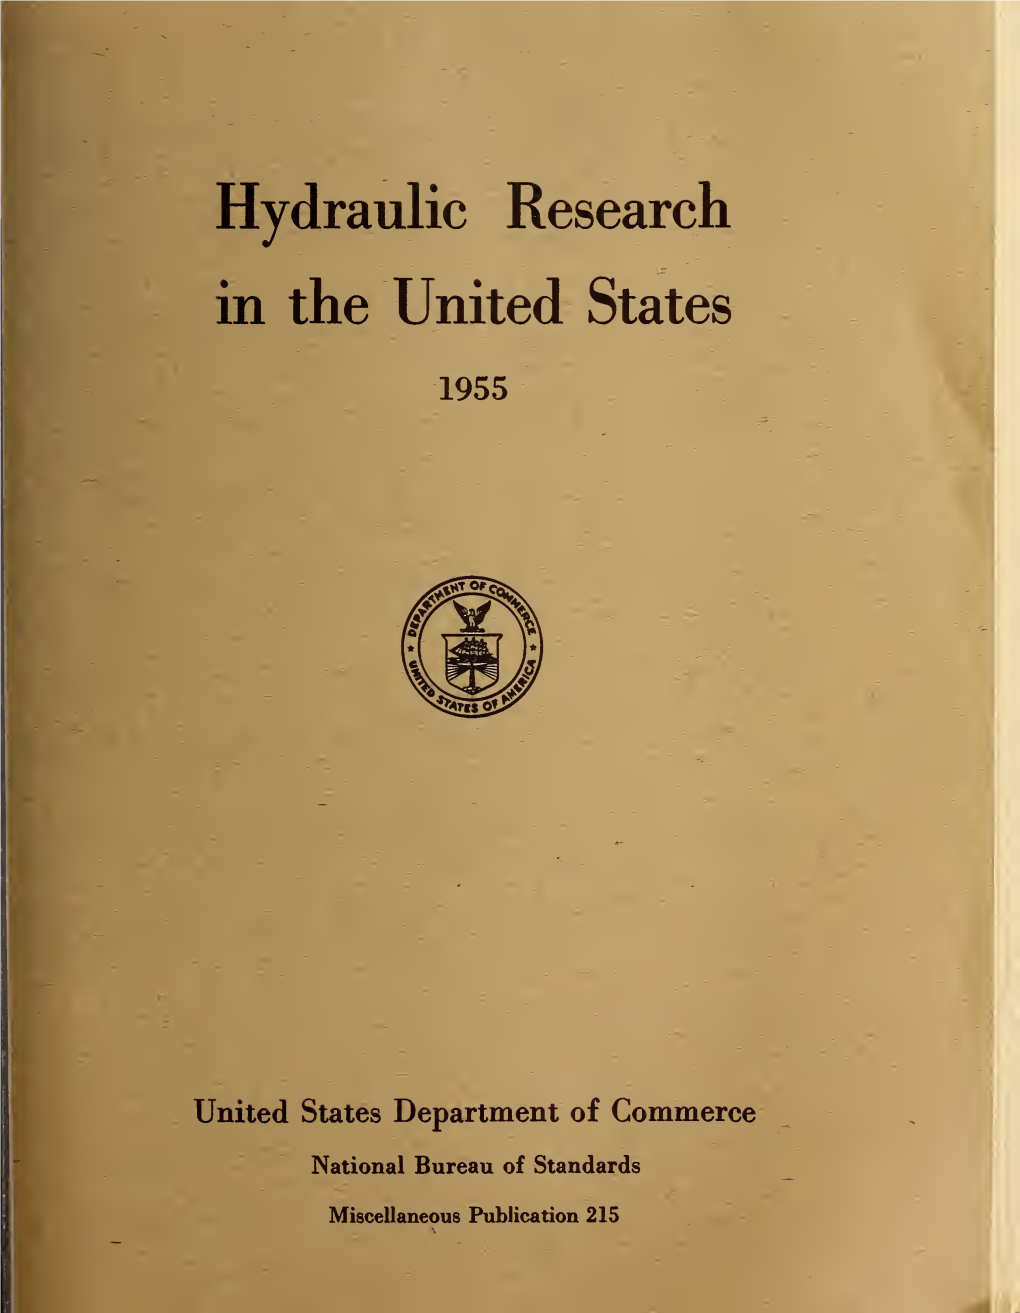 Hydraulic Research in the United States 1955